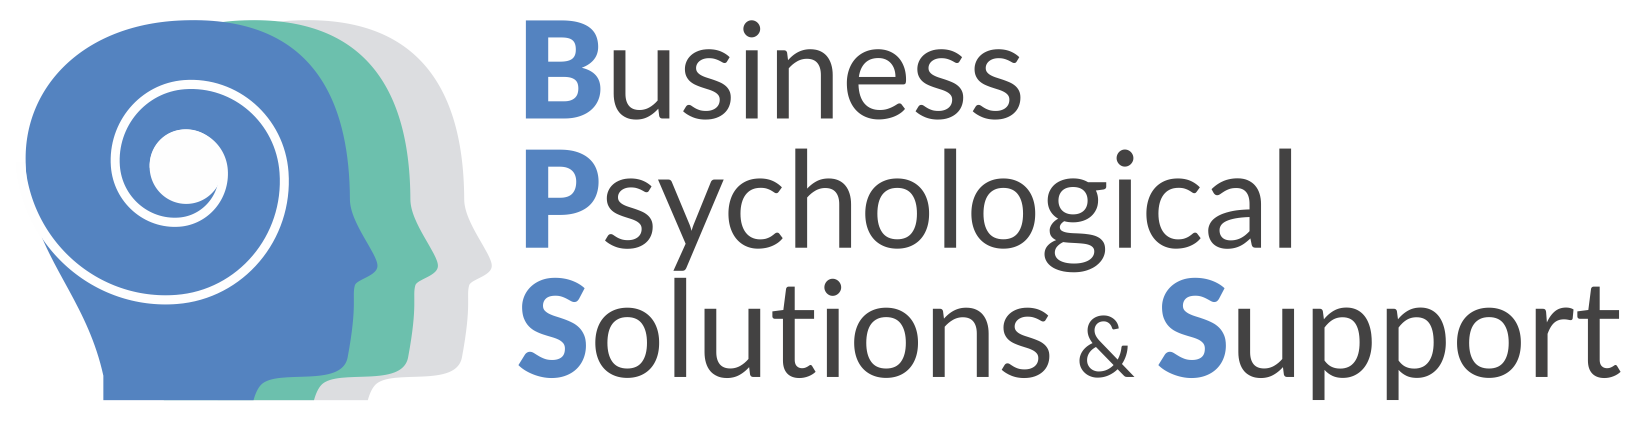 Business Psychological Solutions & Support